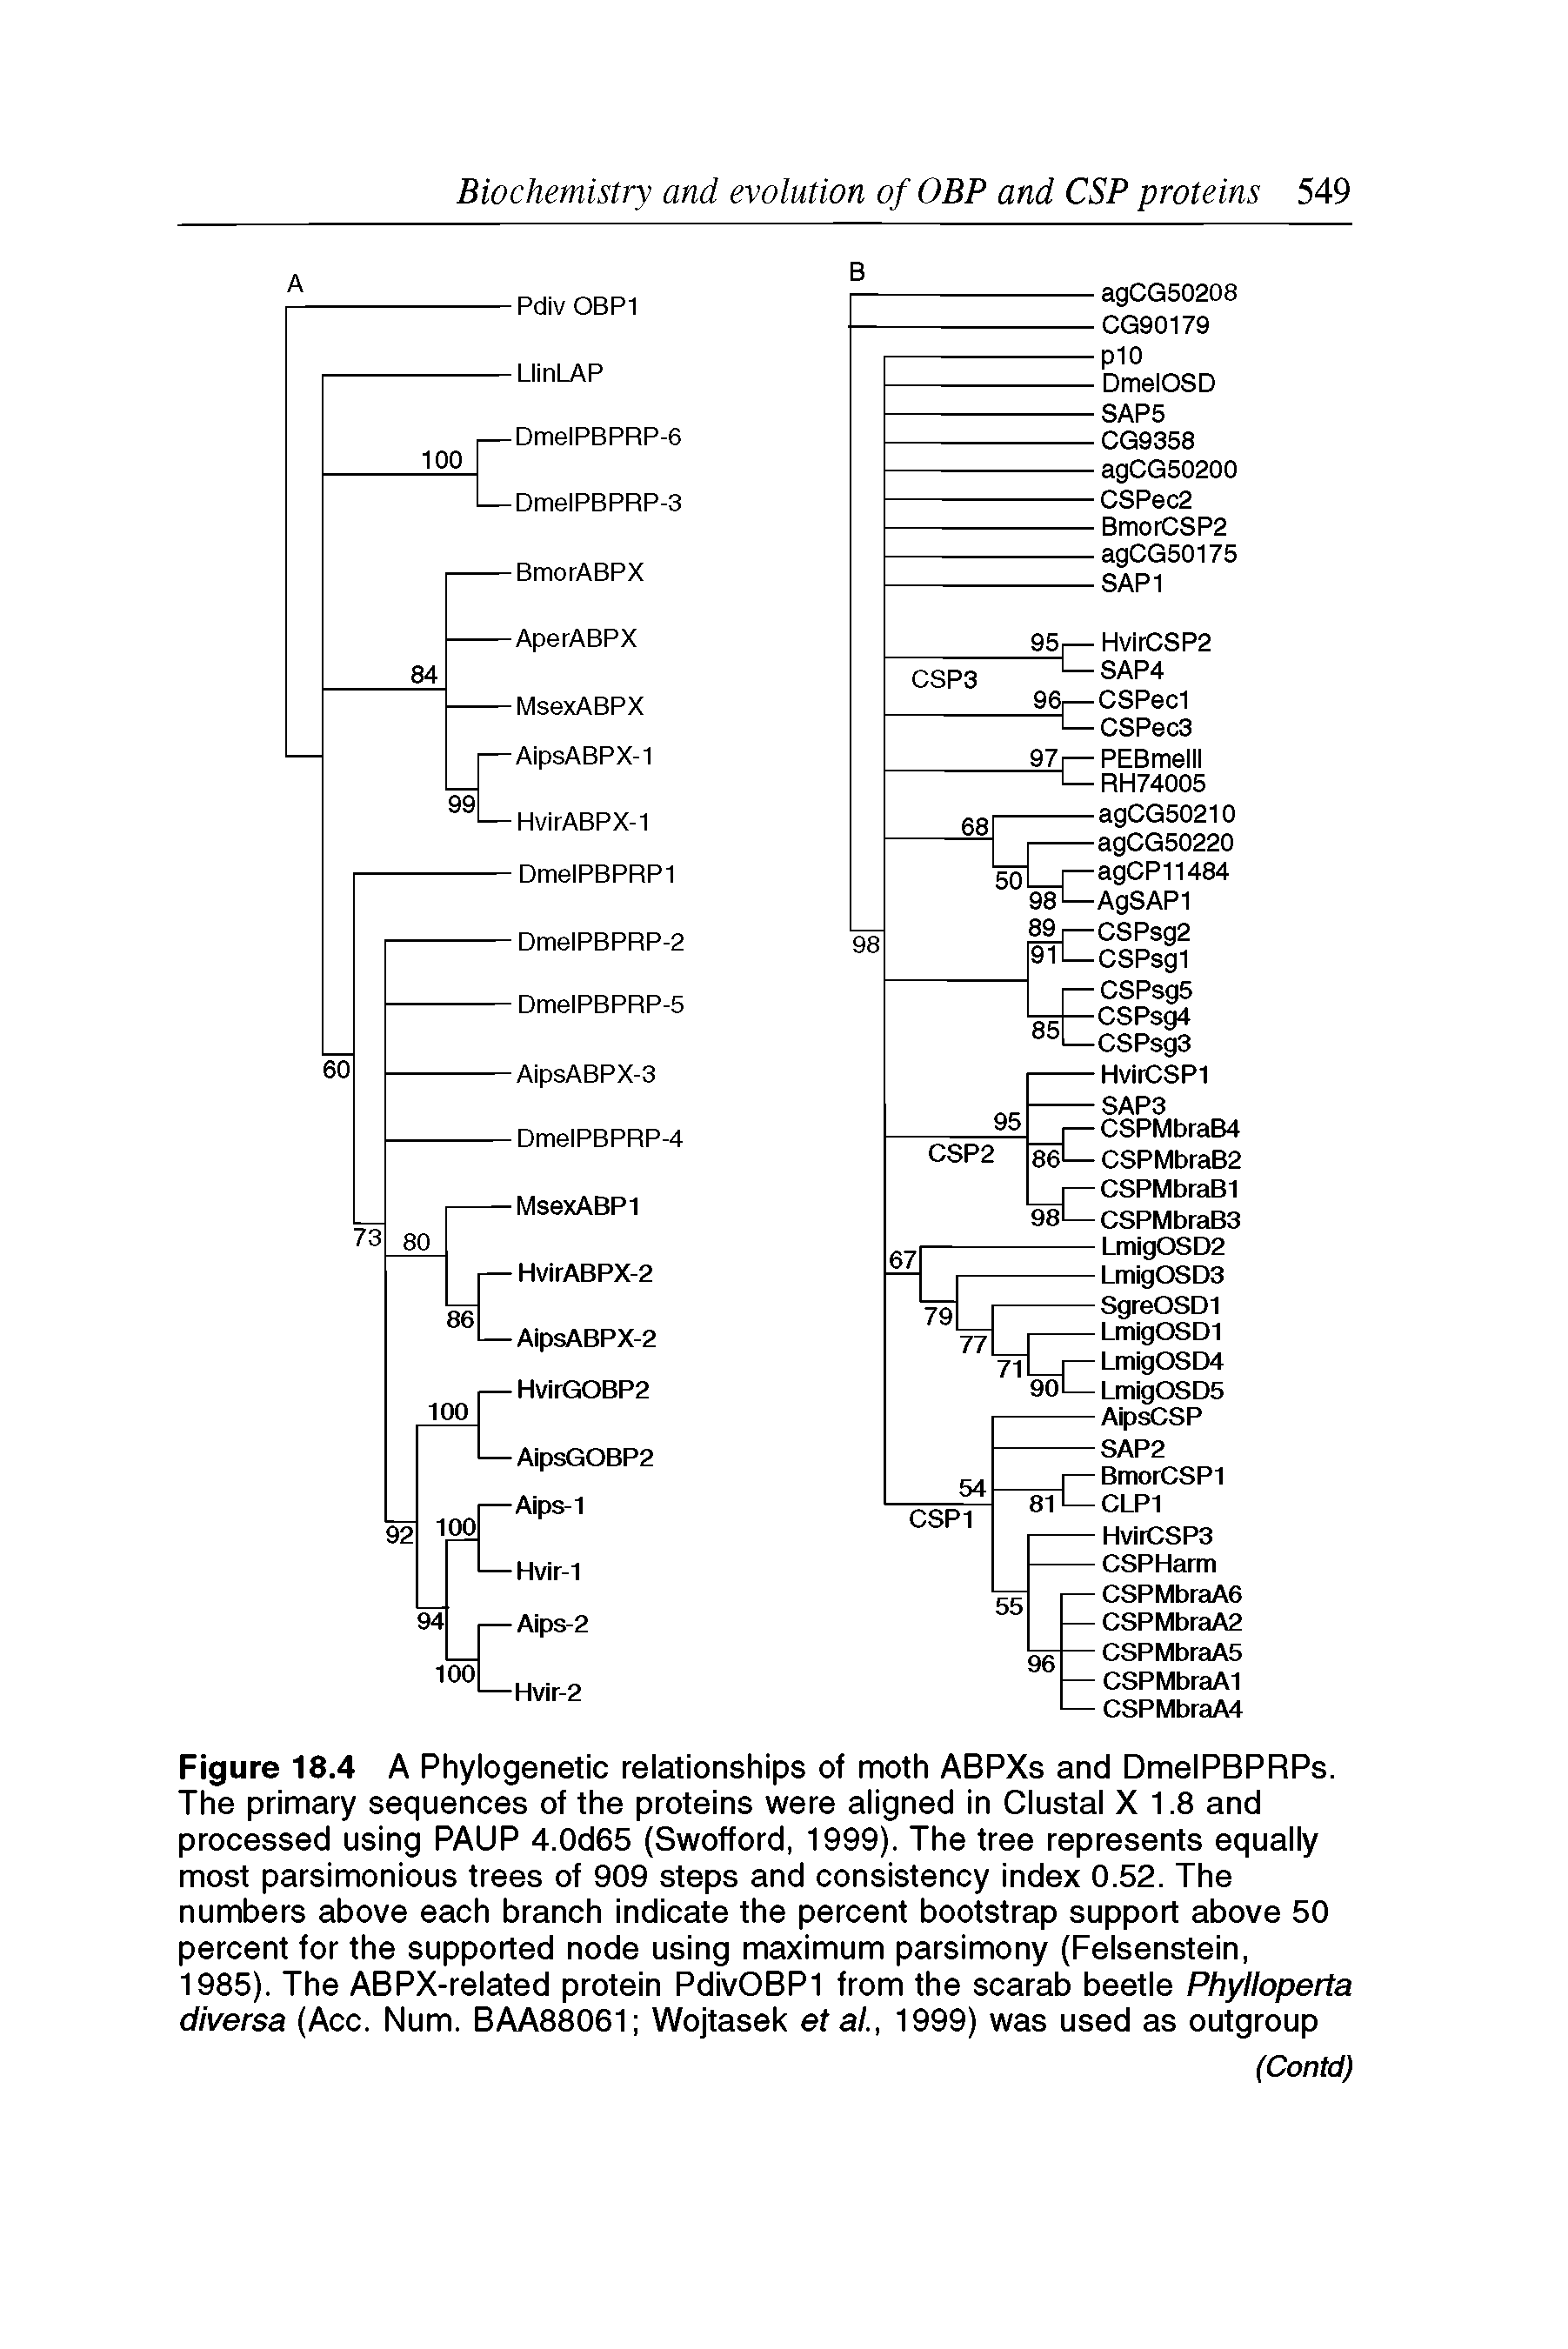 Figure 18.4 A Phylogenetic relationships of moth ABPXs and DmeIPBPRPs. The primary sequences of the proteins were aligned in Clustal X 1.8 and processed using PAUP 4.0d65 (Swofford, 1999). The tree represents equally most parsimonious trees of 909 steps and consistency index 0.52. The numbers above each branch indicate the percent bootstrap support above 50 percent for the supported node using maximum parsimony (Felsenstein,...